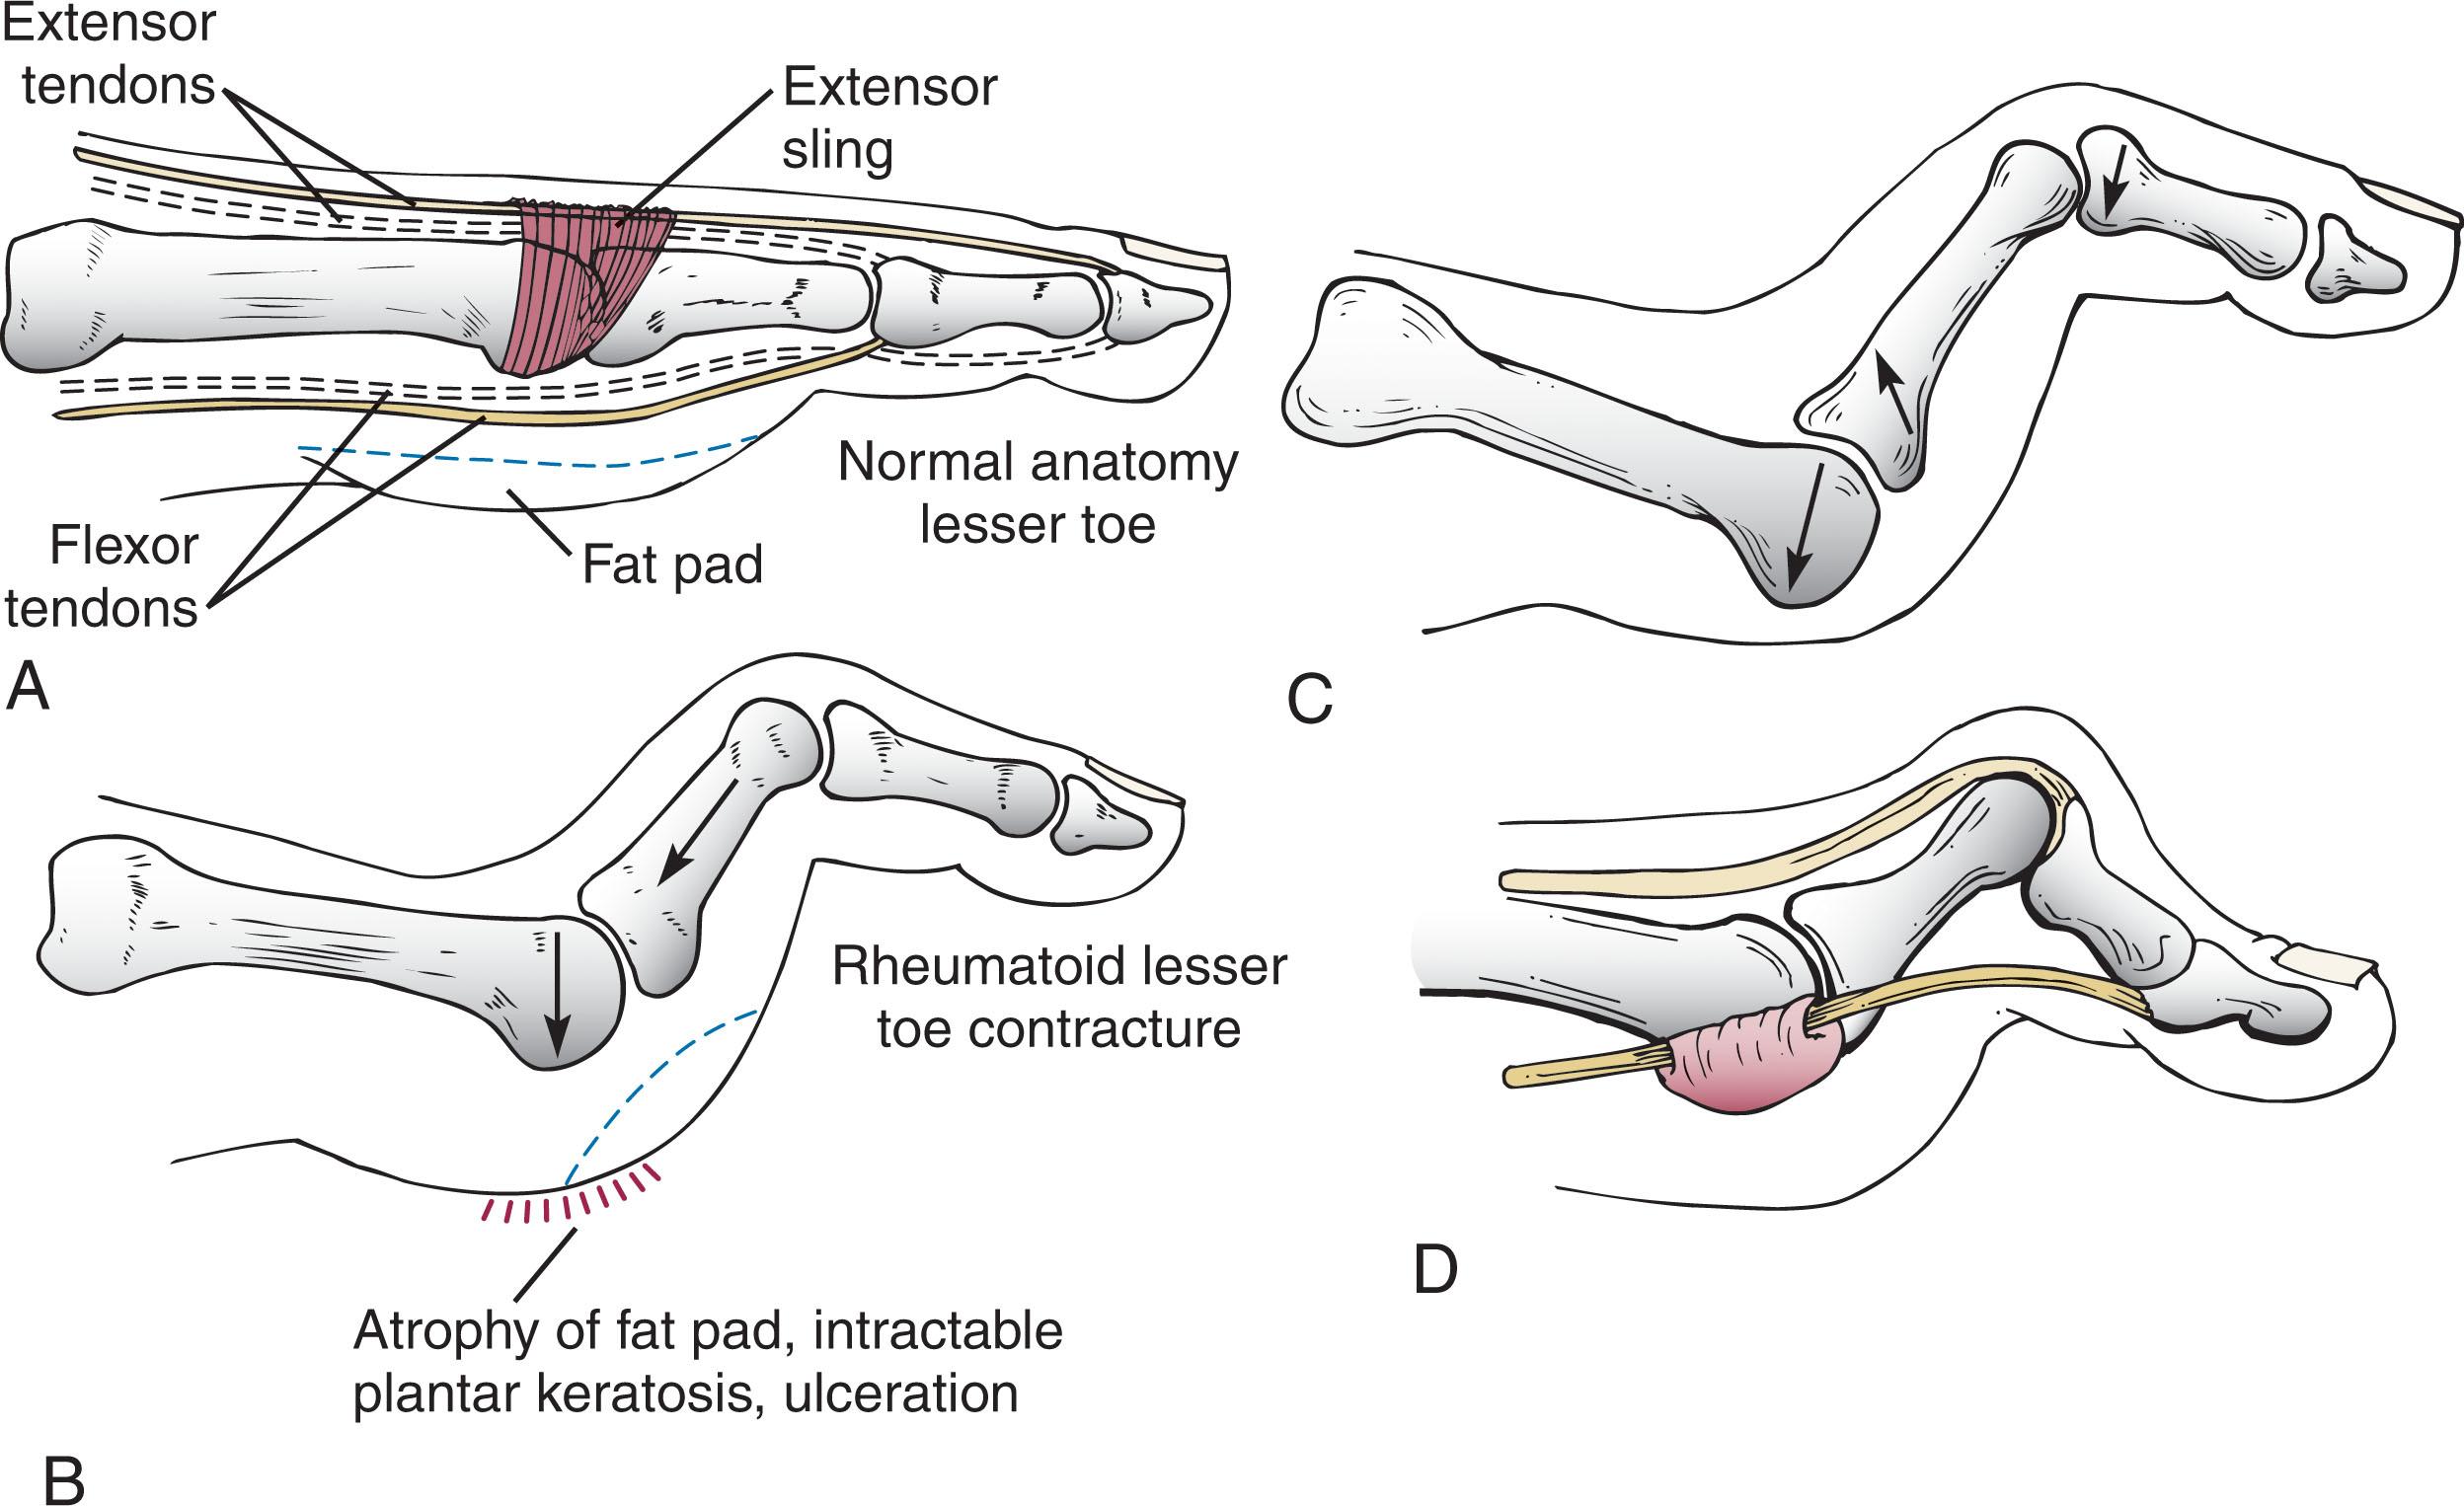 Fig. 21-23, A , Normal alignment and balance of the metatarsophalangeal (MTP) joints and toes. Fat pad is centered beneath metatarsal heads. B , As rheumatoid deformity progresses, an imbalance occurs with progressive dorsal subluxation of the MTP joints and deformities of the lesser toes. The fat pad is drawn distally by the contracting lesser toes. C , End-stage deformity. Dislocation of the MTP joint with proximal phalanx ankylosed to the dorsal aspect of the metatarsal head. This forces the metatarsal head into the plantar aspect of the foot and results in severe callus formation. Lesser toes develop hammer toe deformities that often become severely contracted, and the fat pad is drawn distally and is no longer in a functional position. D , With chronic dorsiflexion deformity of the proximal phalanx at the MTP joint, flexor tendons subluxate dorsally, becoming functional extensors of the MTP joint.